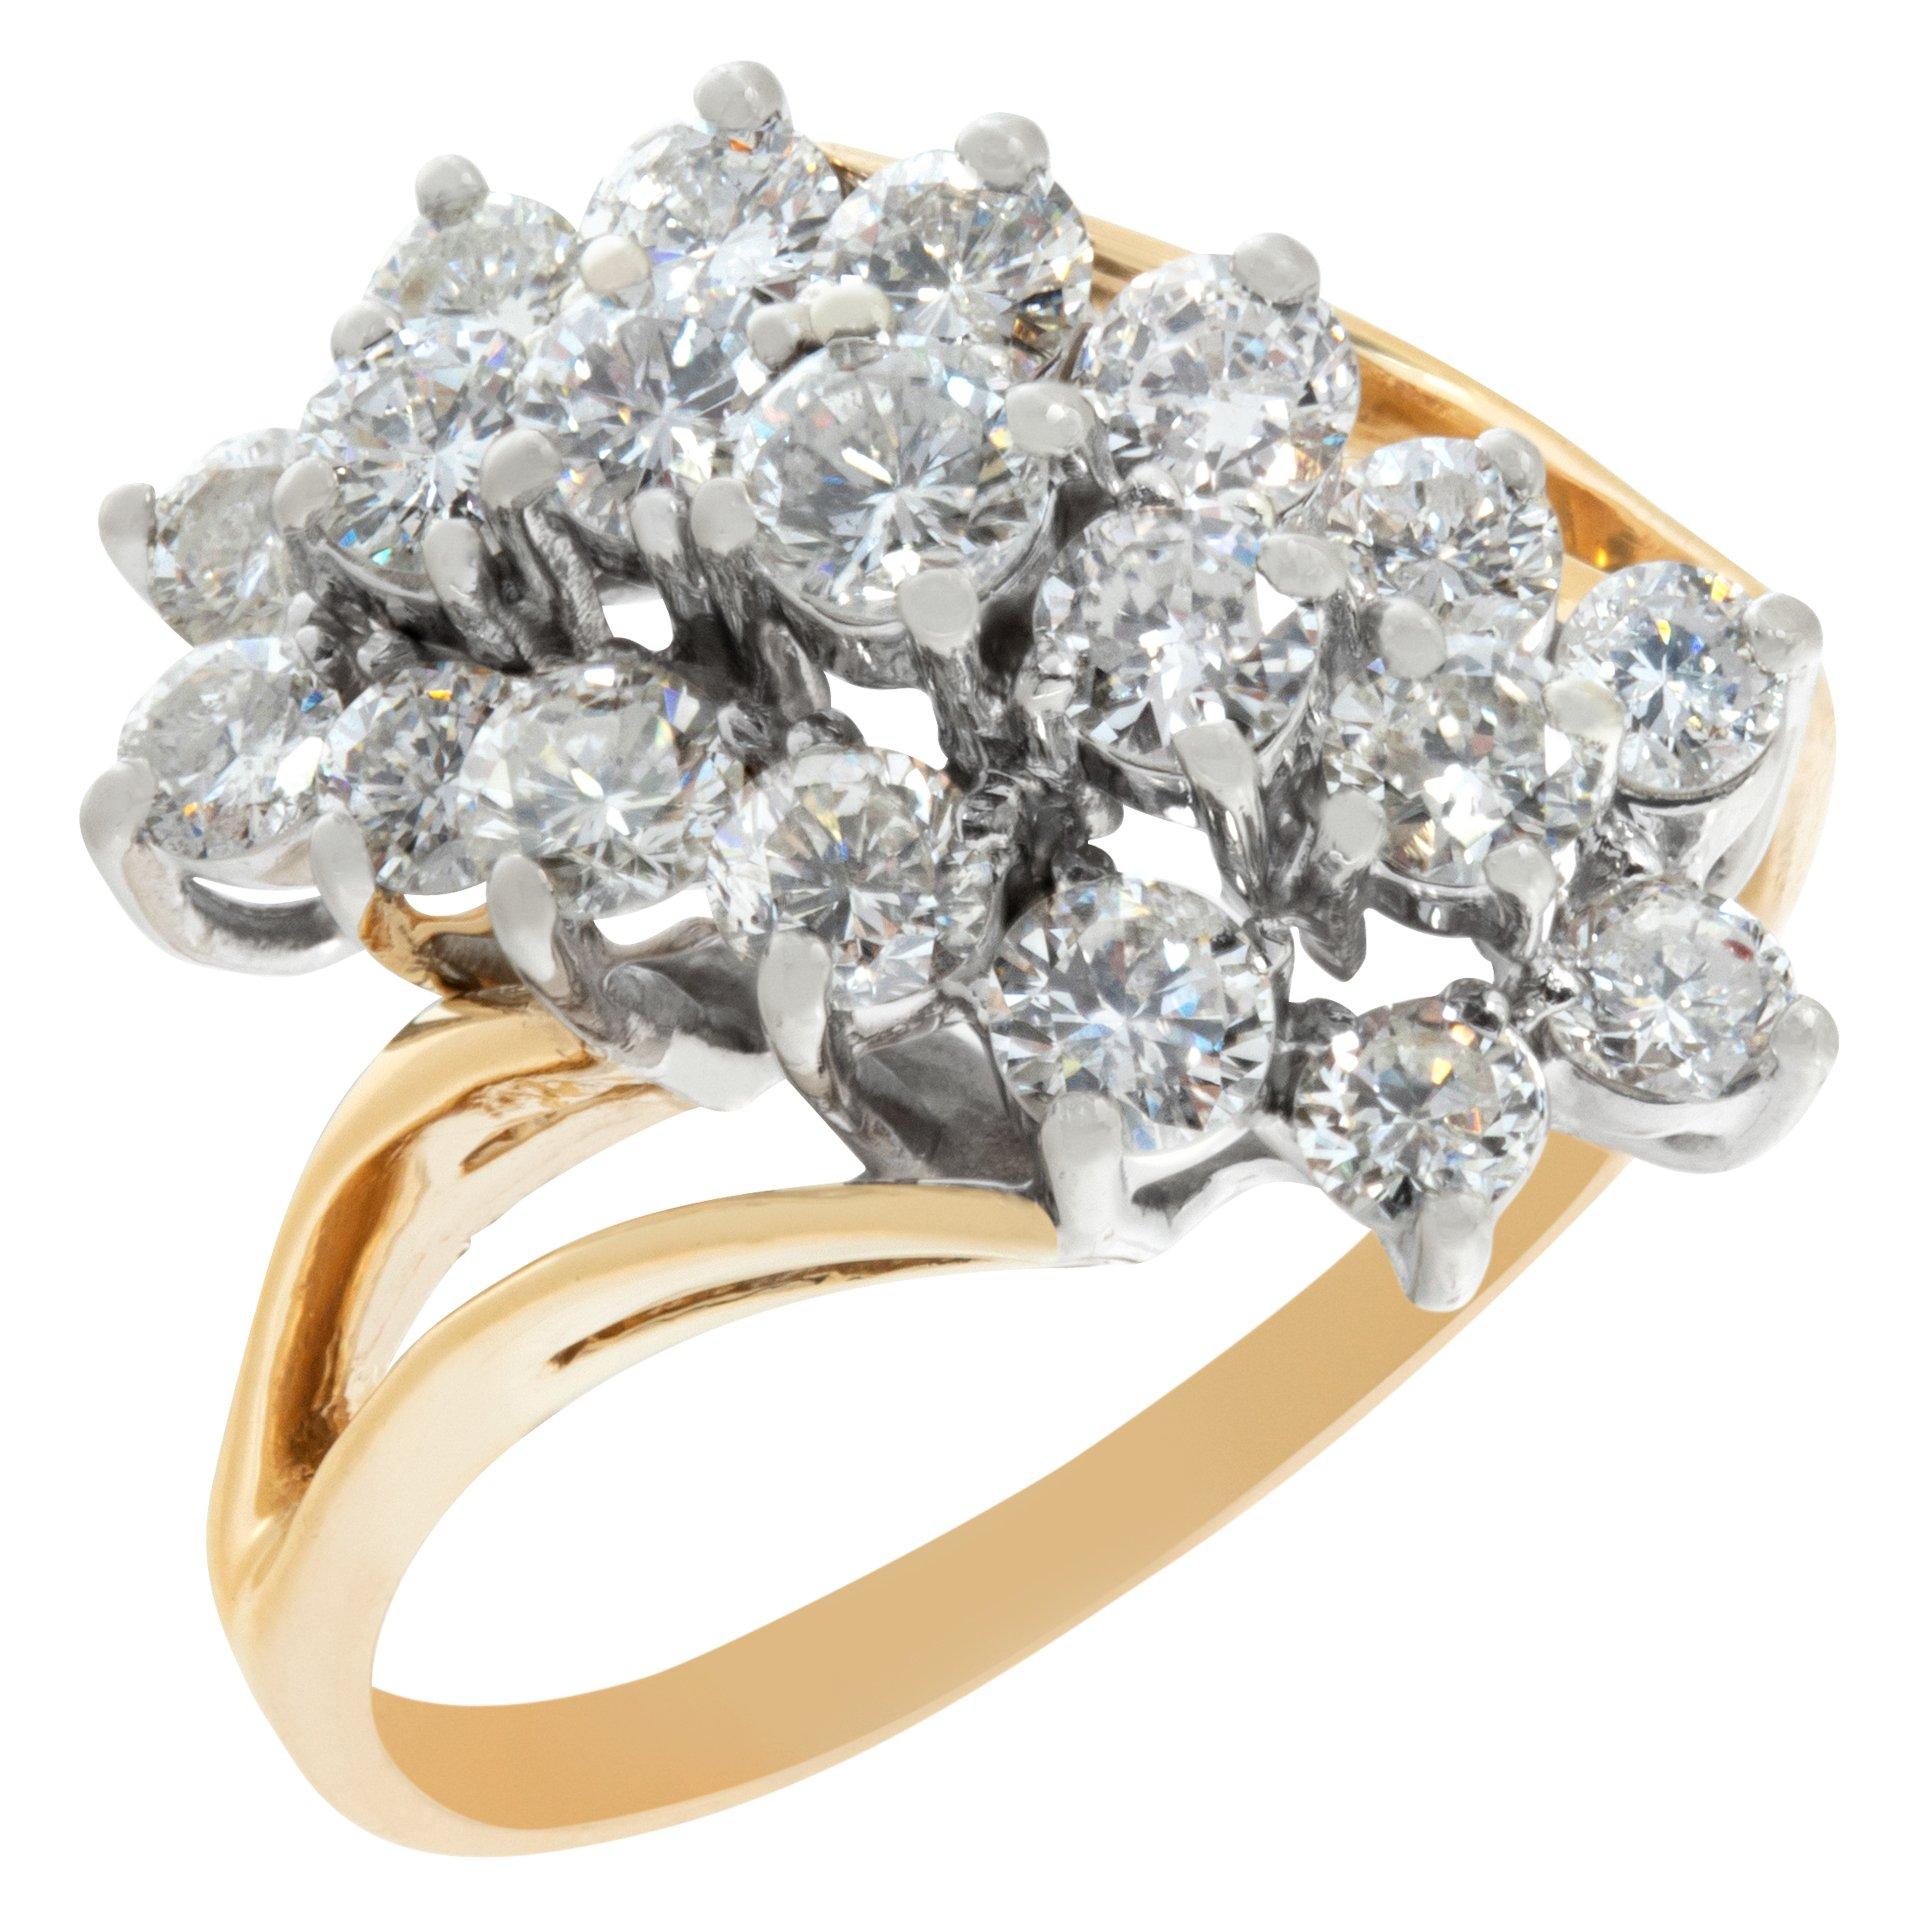 Diamond Ring in 14k White and Yellow Gold In Excellent Condition For Sale In Surfside, FL